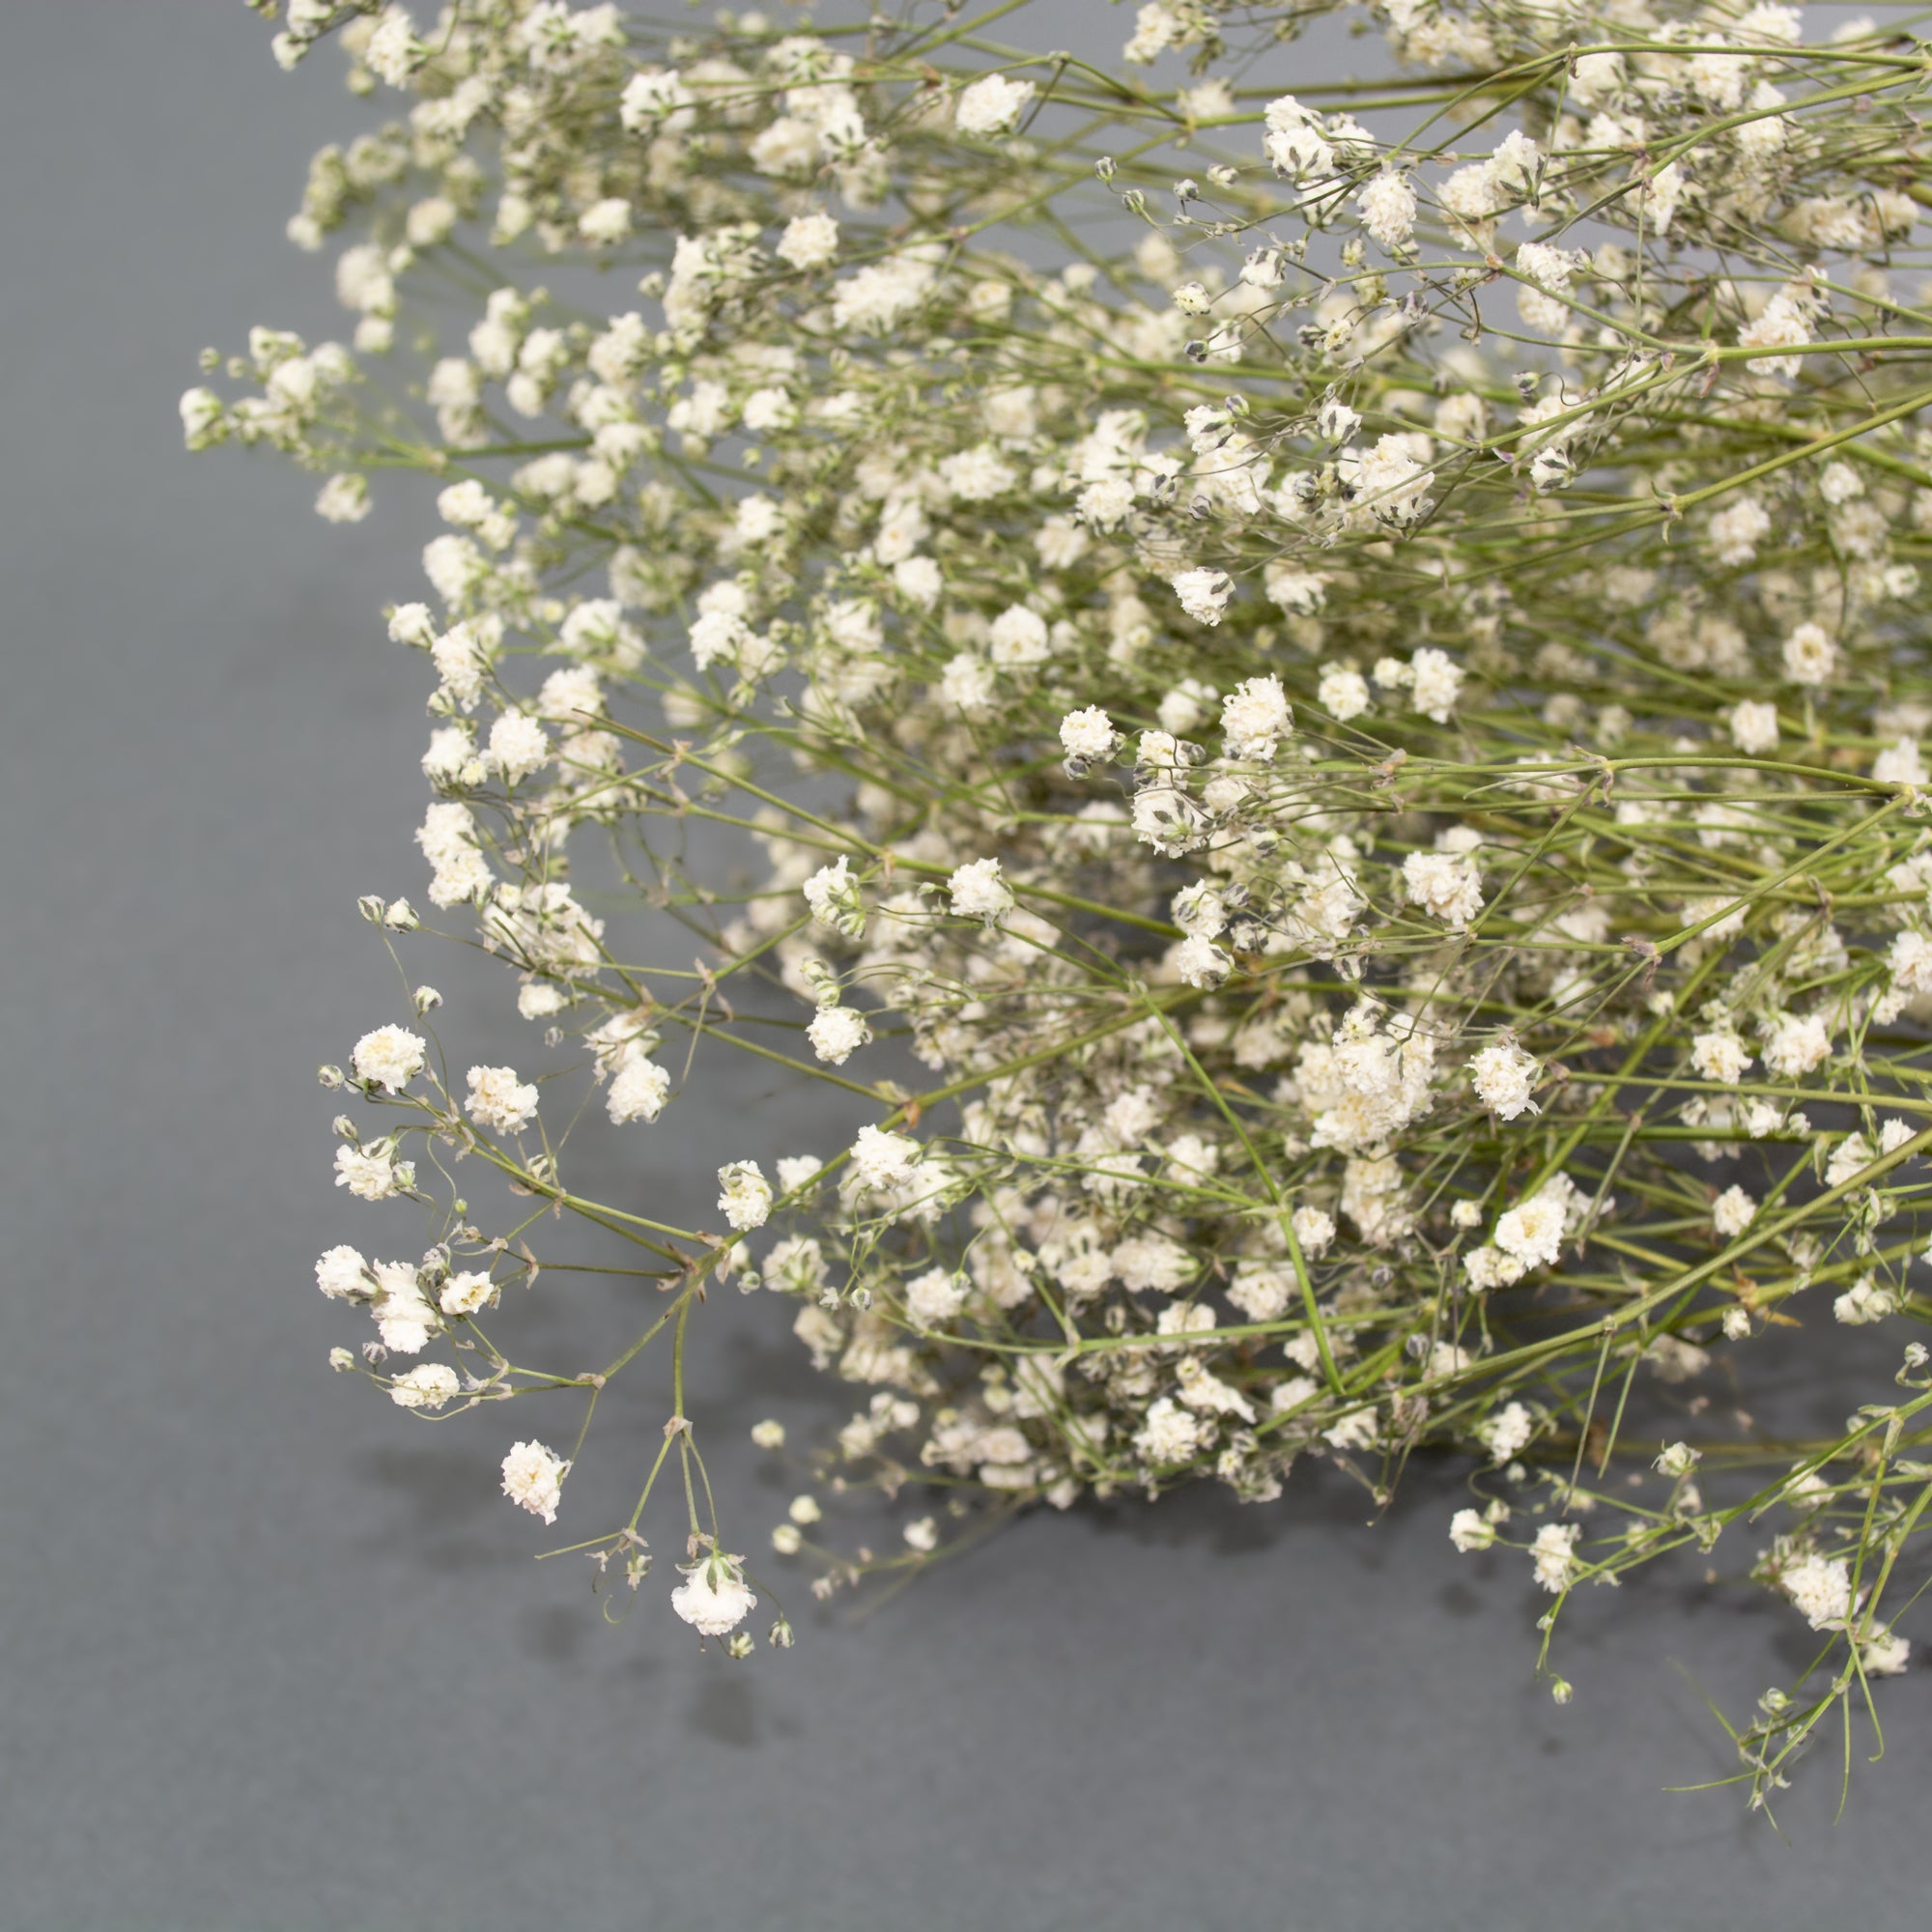 This is an image of a bunch of preserved white gypsophila on a white background.